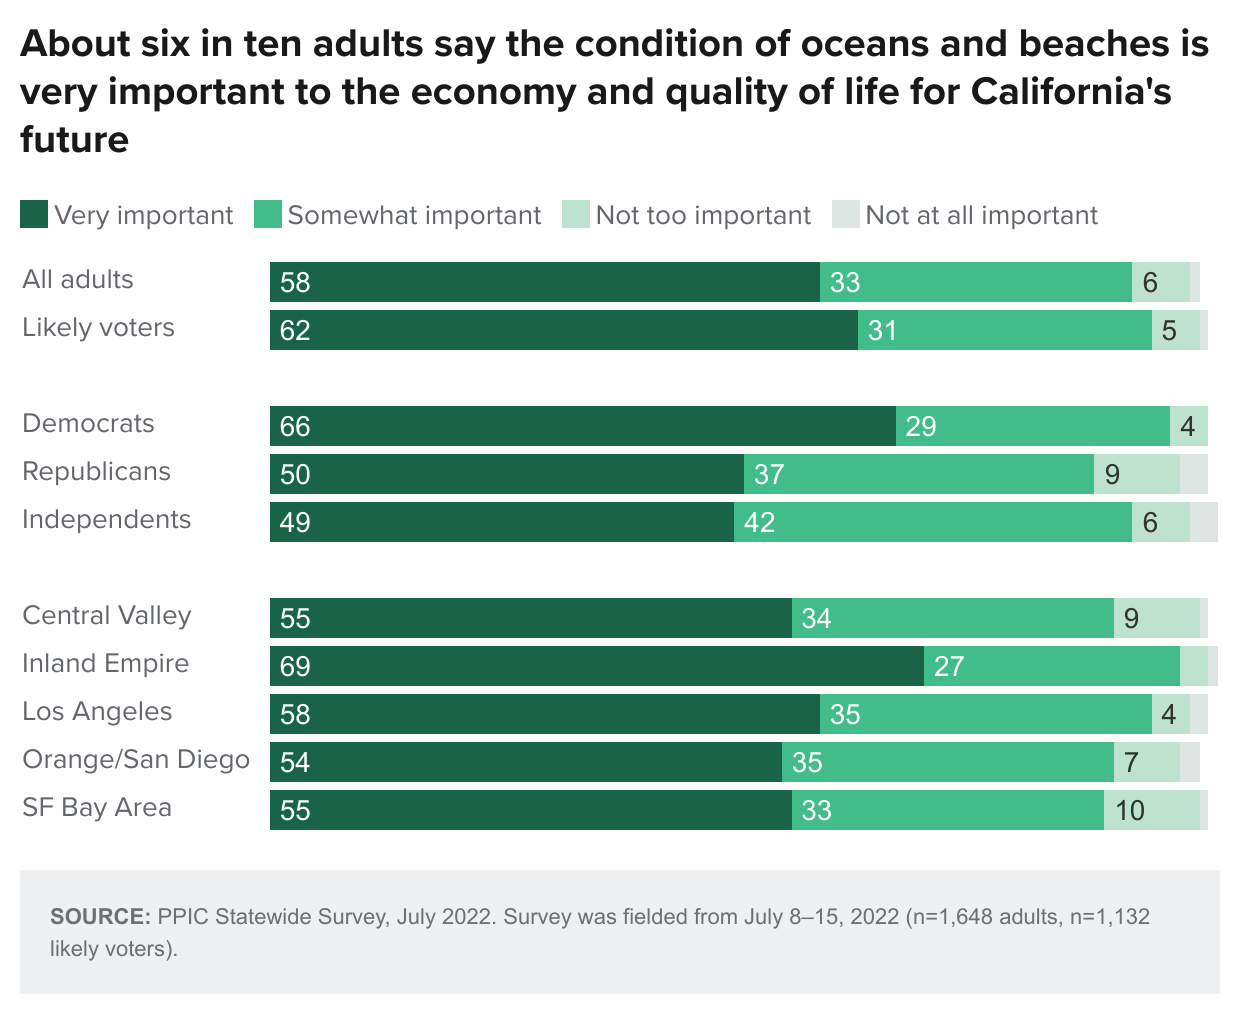 figure - About six in ten adults say the condition of oceans and beaches is very important to the economy and quality of life for California's future